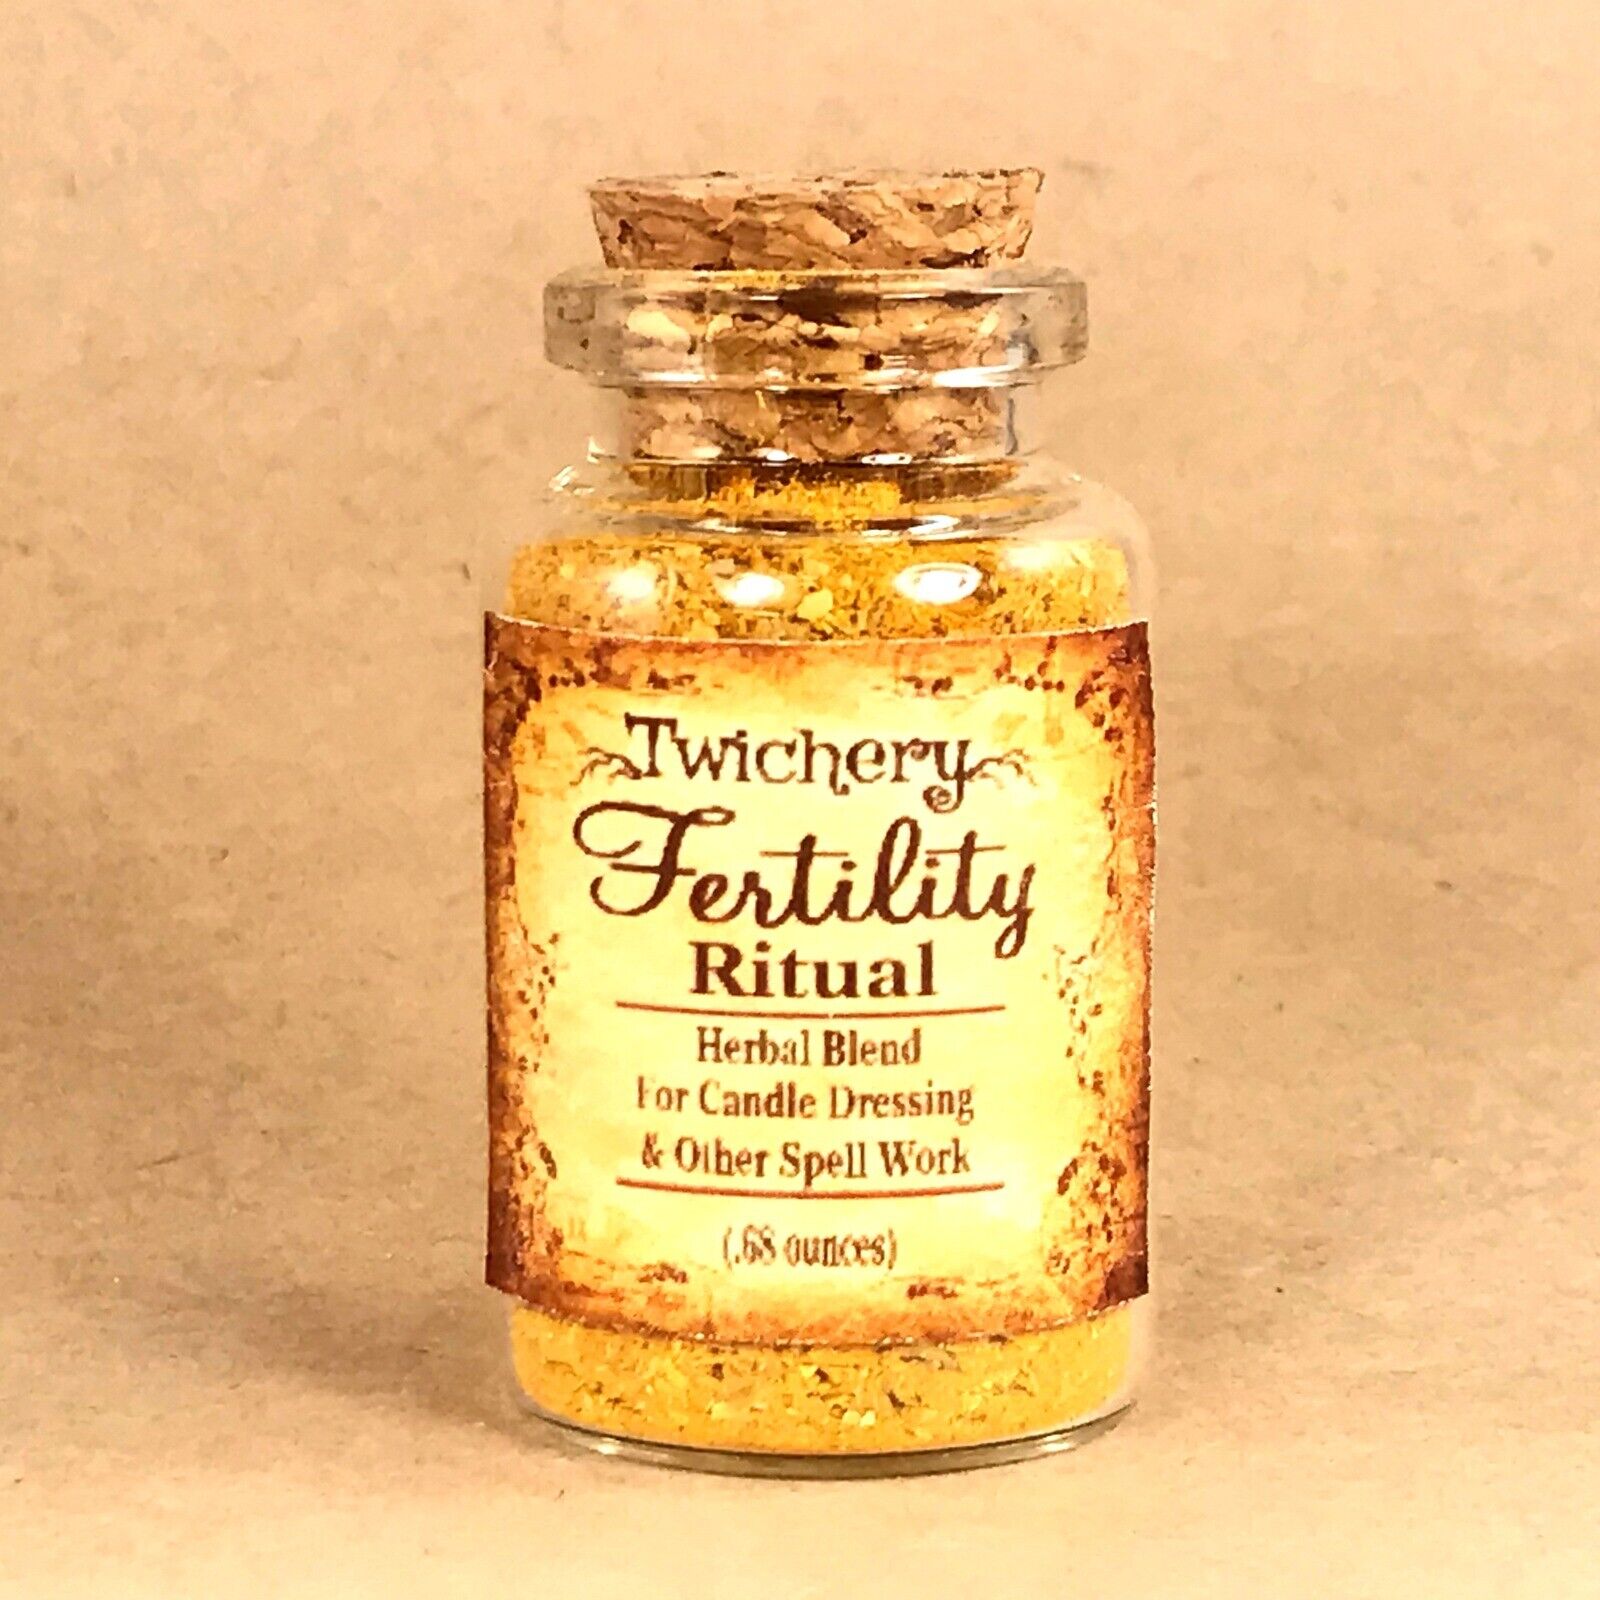 FERTILITY RITUAL HERBAL BLEND, Candle Dressing Spell Casting Hoodoo Wicca Pagan 